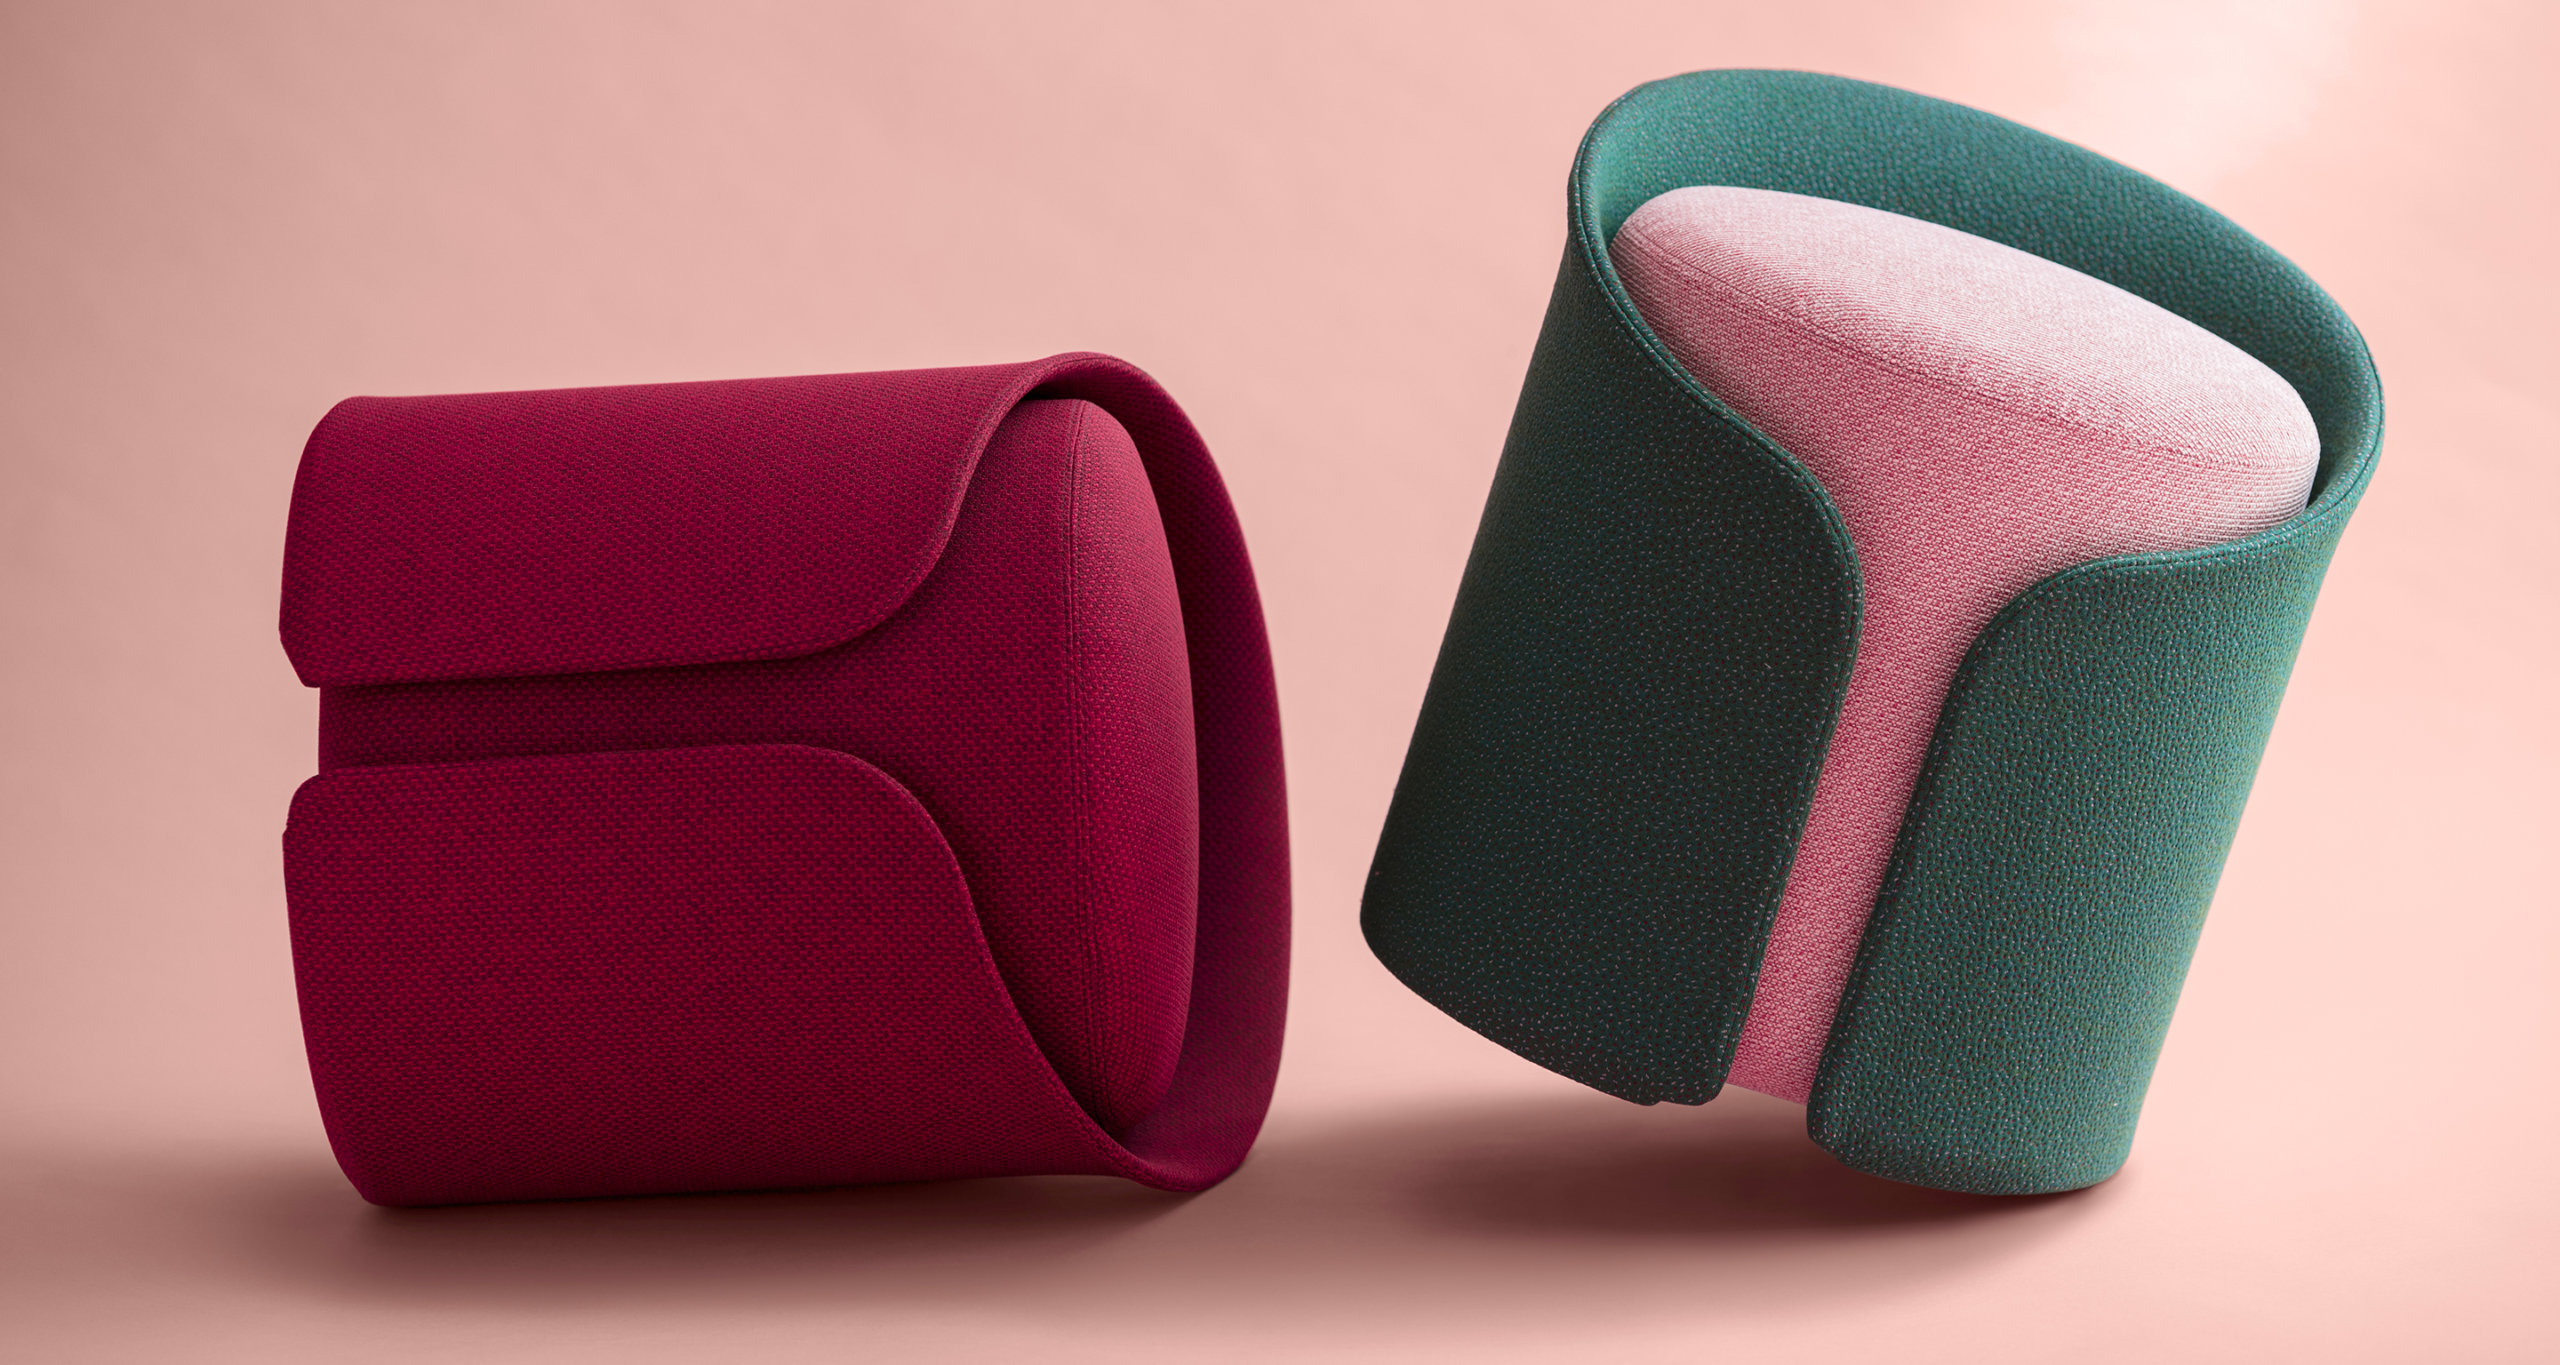 CARDIGAN THE USER-FRIENDLY SEAT INSPIRED BY HAUTE COUTURE